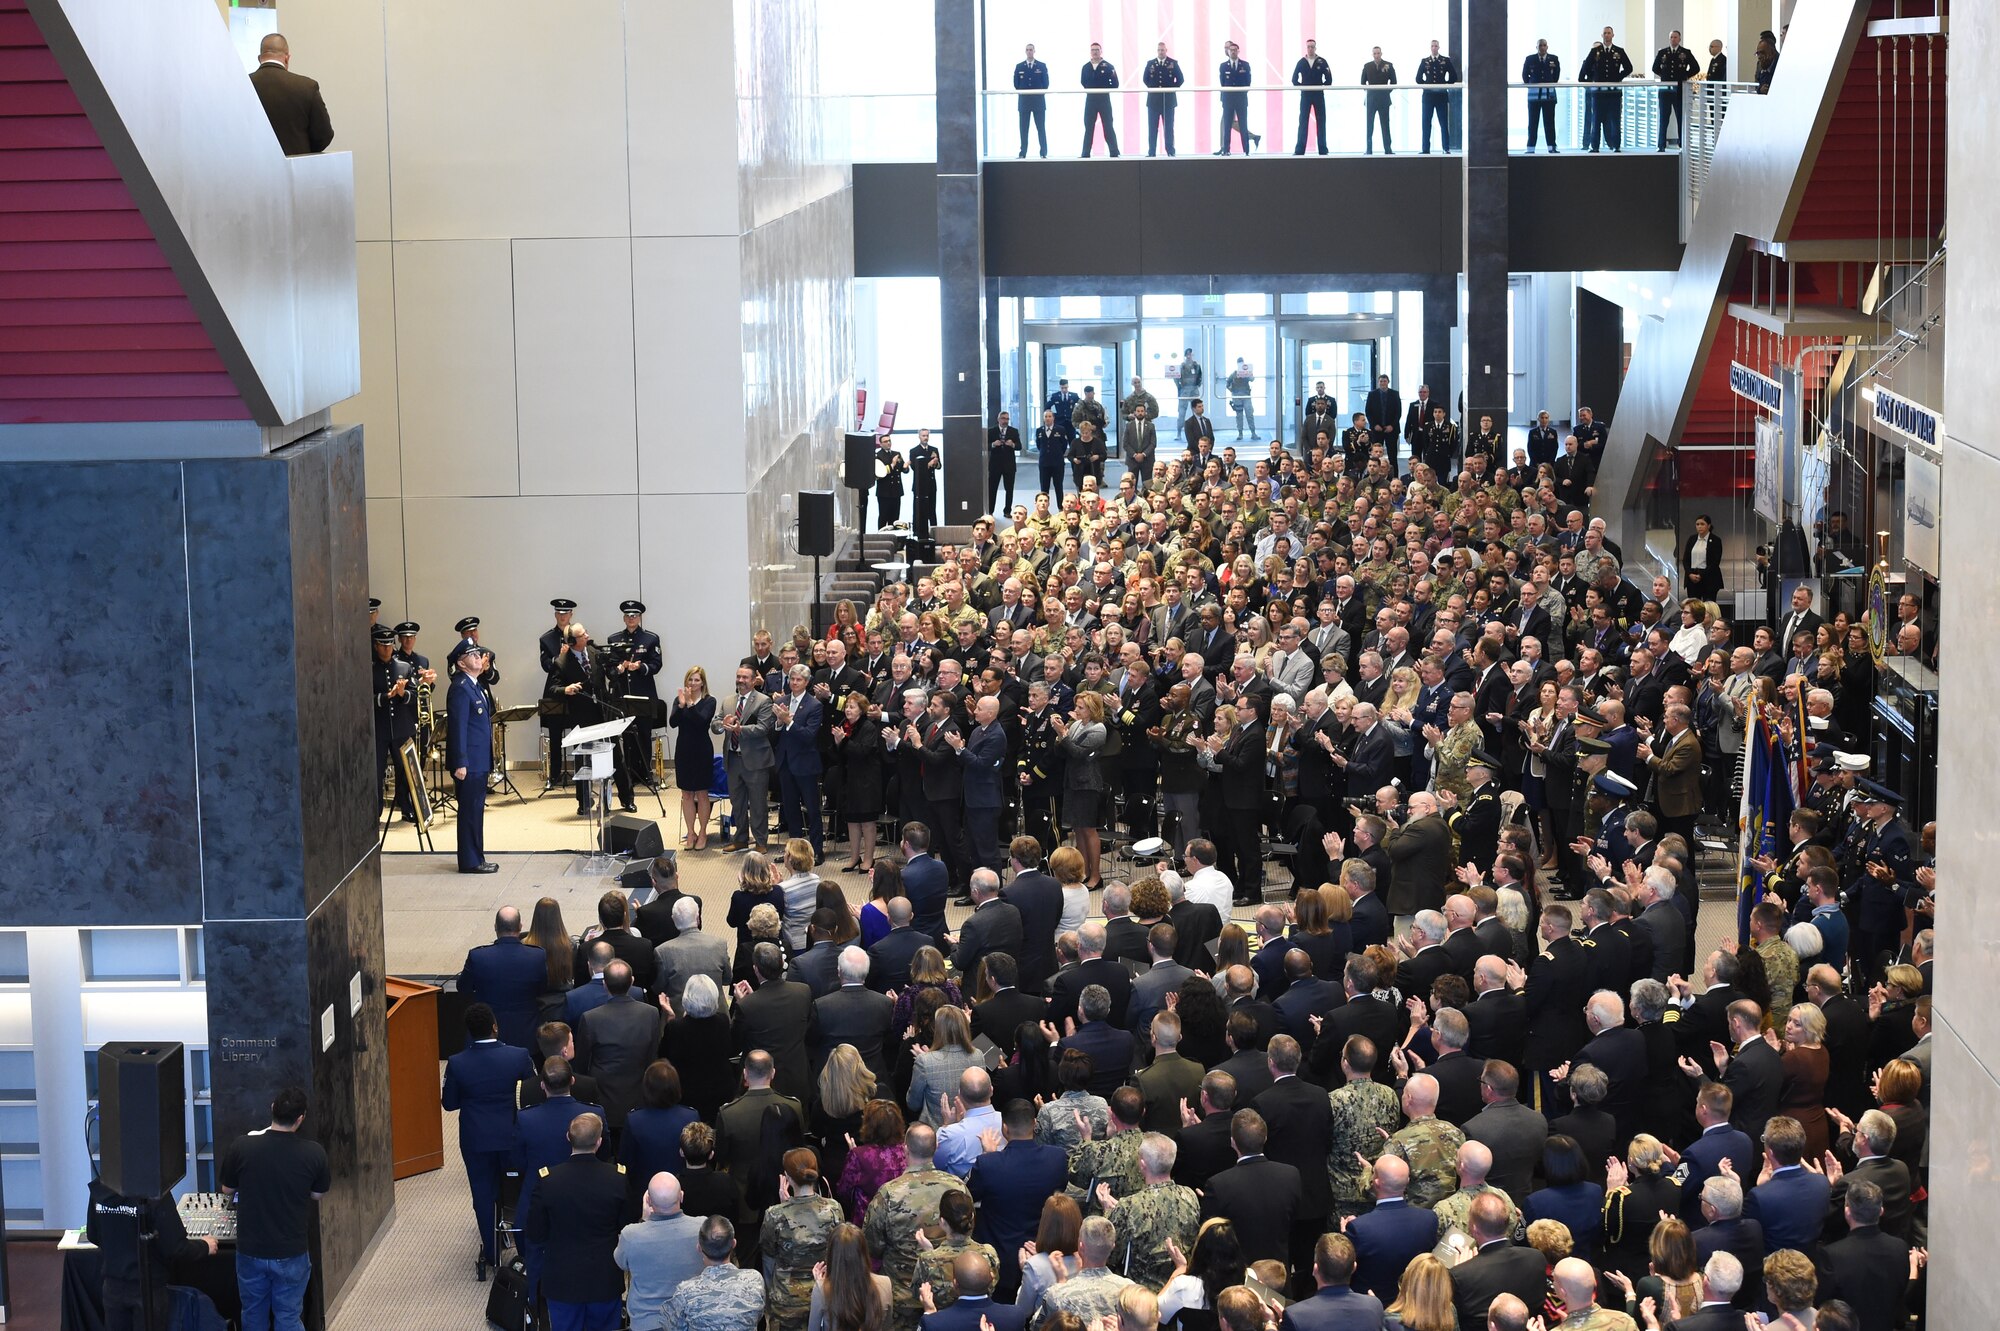 The audience gives U.S. Air Force Gen. John Hyten, outgoing commander of U.S. Strategic Command (USSTRATCOM), as standing ovation following his remarks during USSTRATCOM's change of command ceremony at Offutt Air Force Base, Neb., Nov. 18, 2019. USSTRATCOM is a global warfighting command and the ultimate guarantor of national and allied security with forces and capability that underpin and enable all other joint force operations. (U.S. Air Force photo by Staff Sgt. Ian Hoachlander)